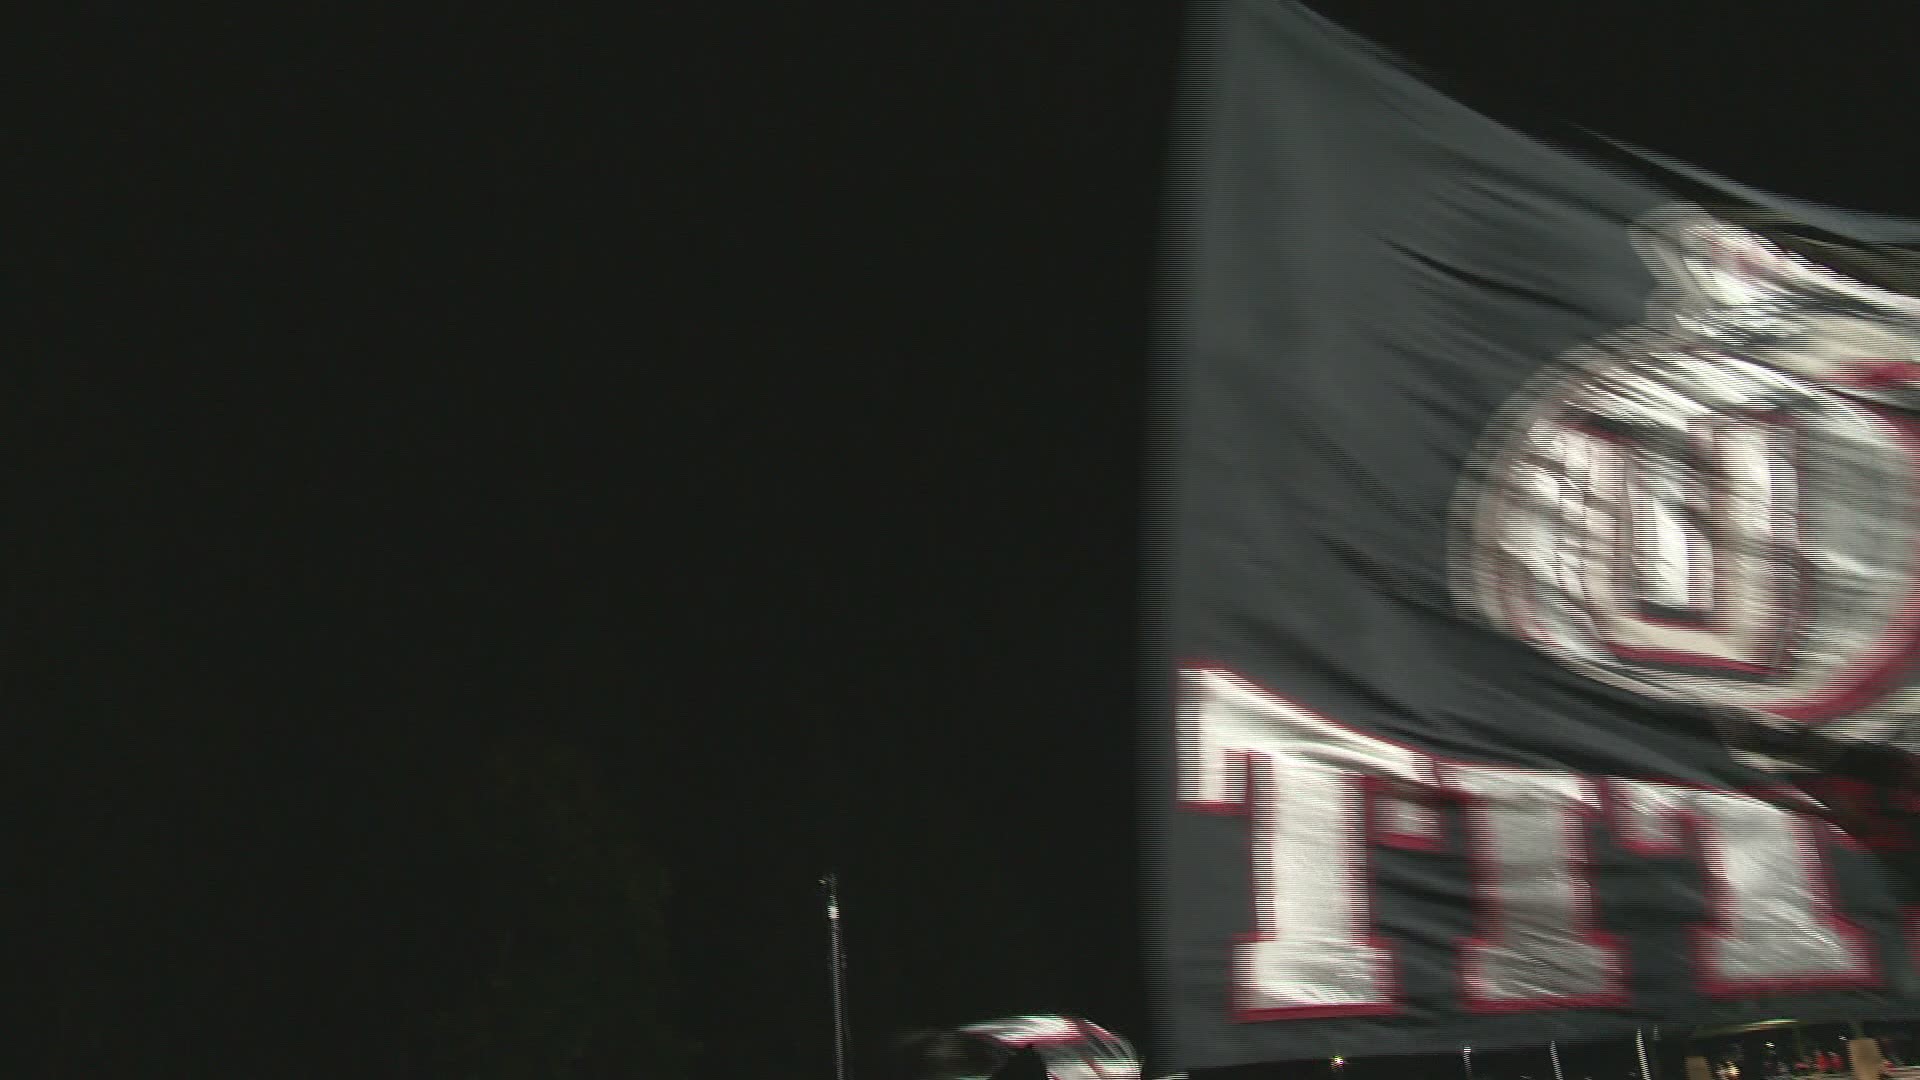 Highlights of Skyview's 30-3 win over Union. Highlights are part of KGW's Friday Night Flights with Orlando Sanchez.